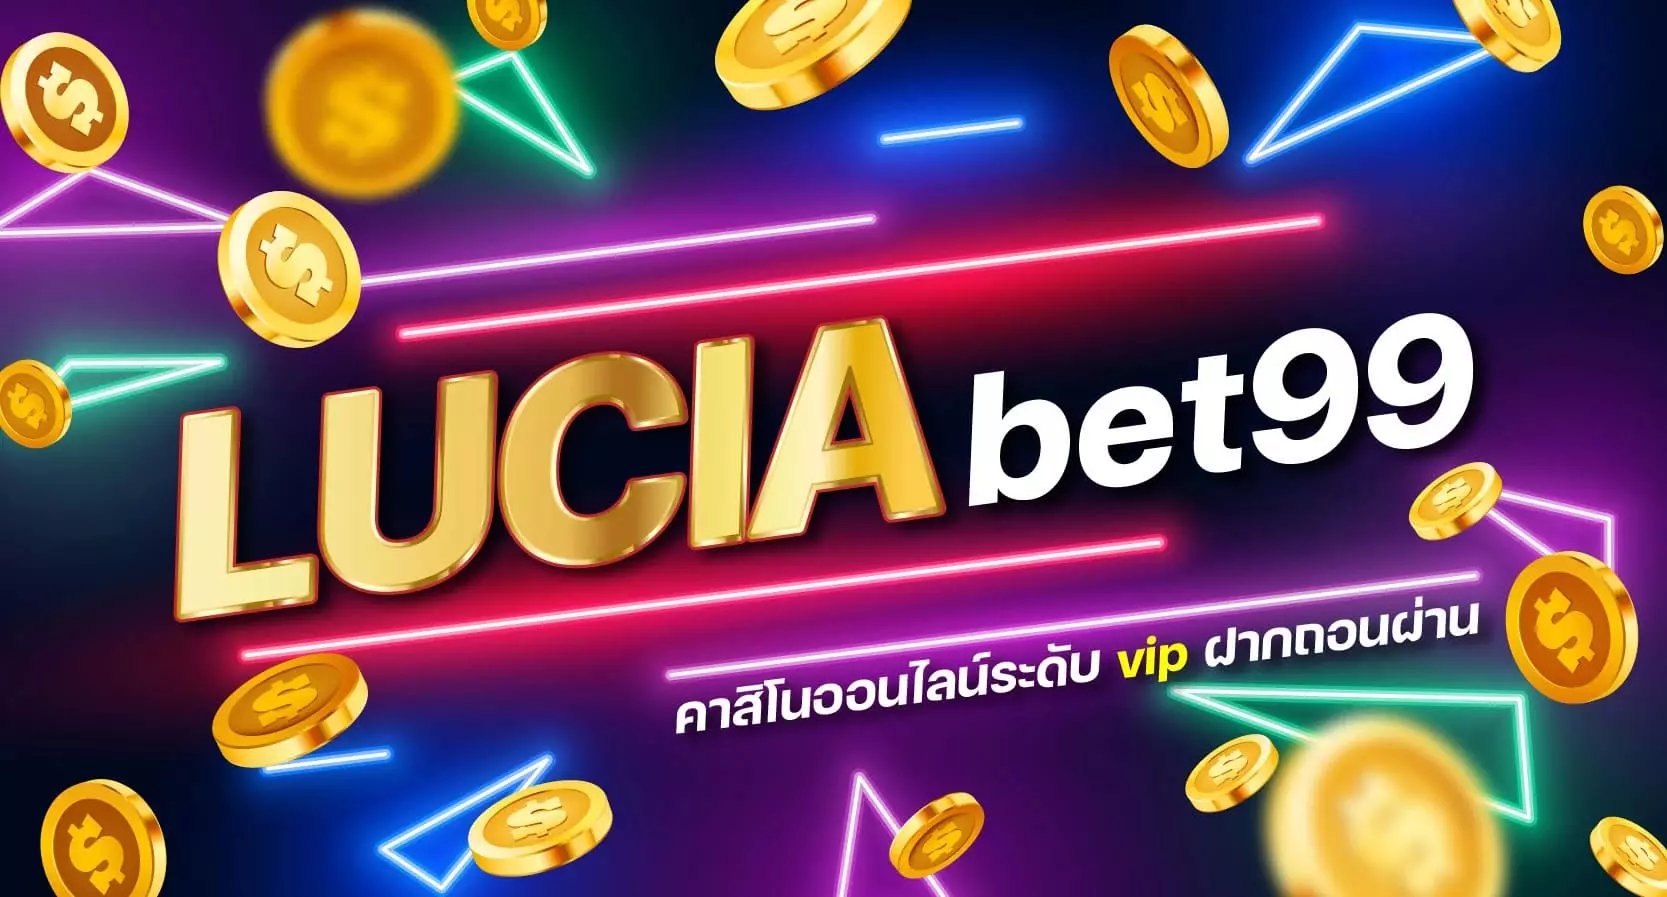 LUCIA bet99